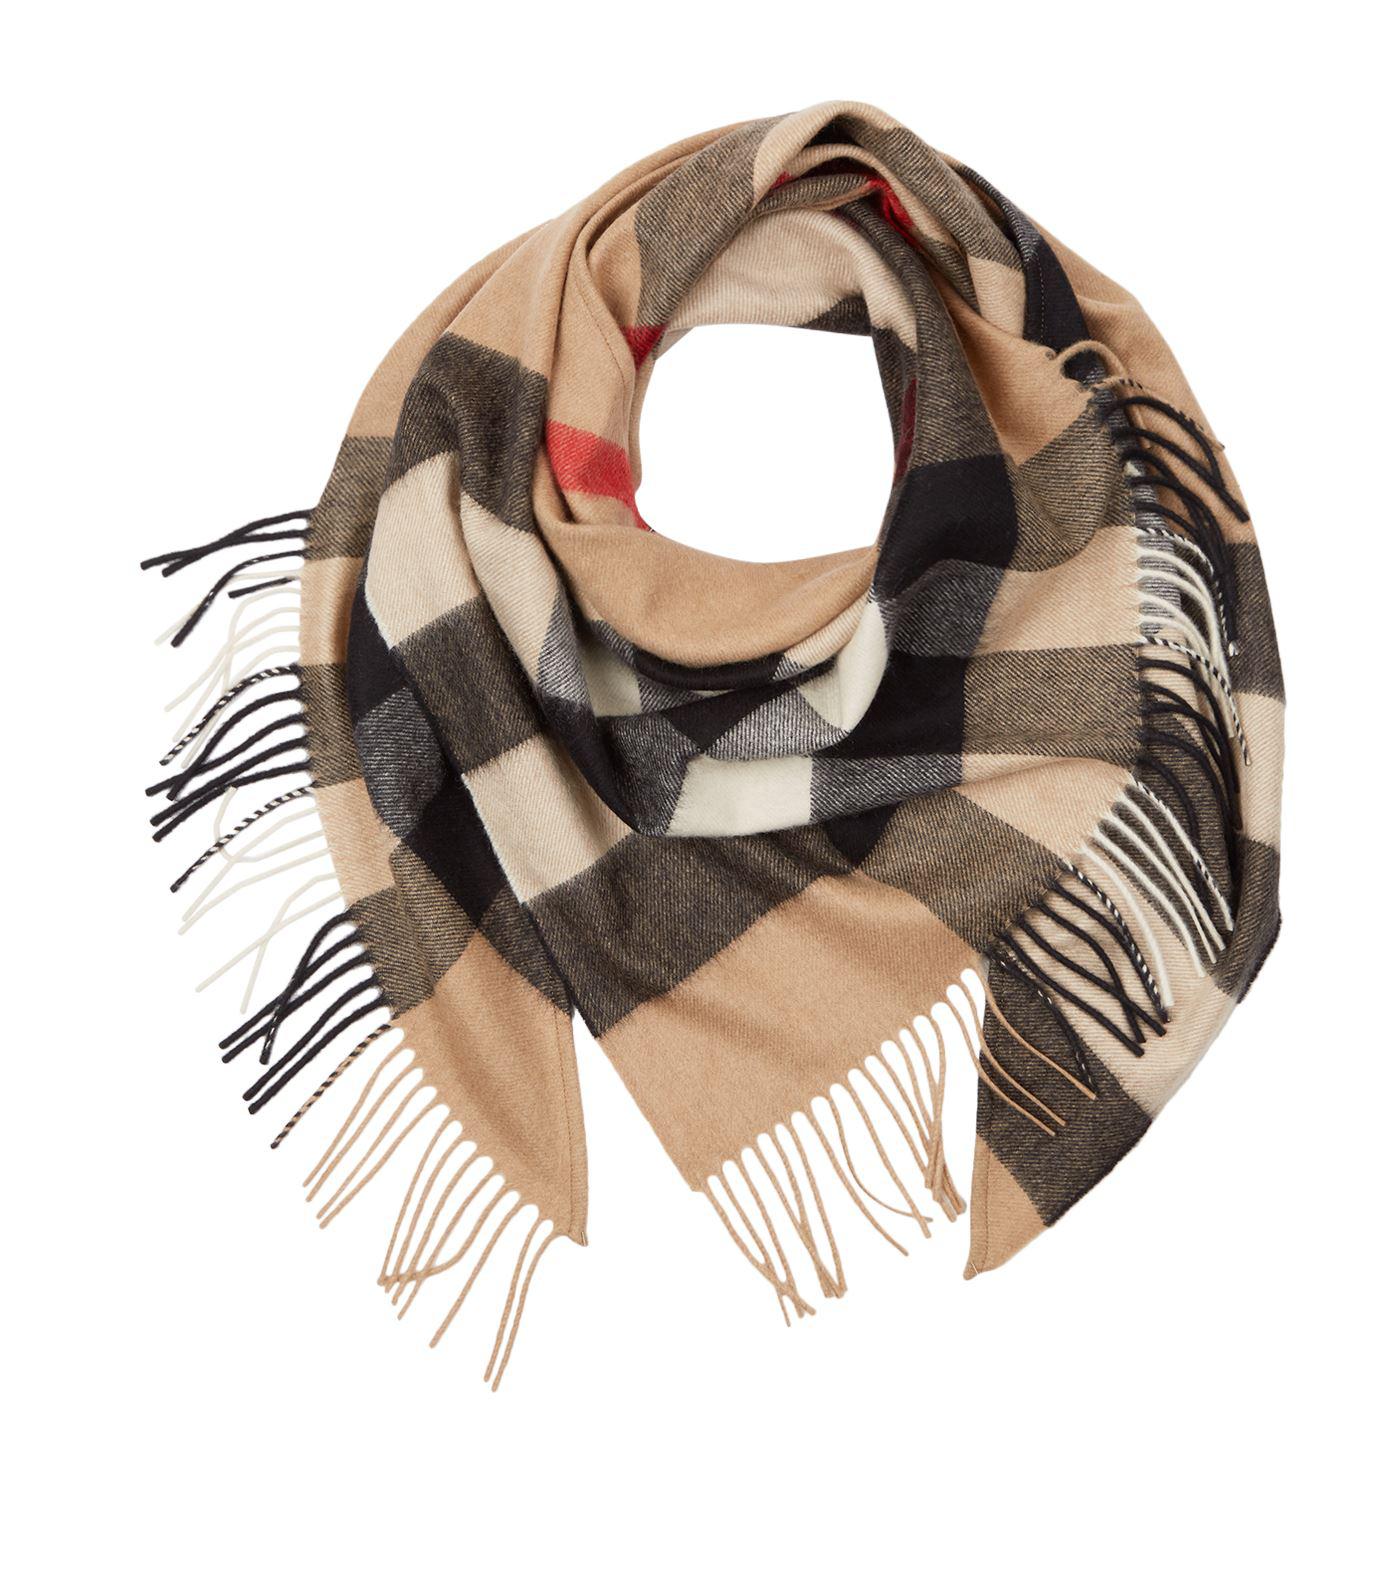 Burberry Cashmere Check Triangular Scarf in Brown - Save 20% - Lyst